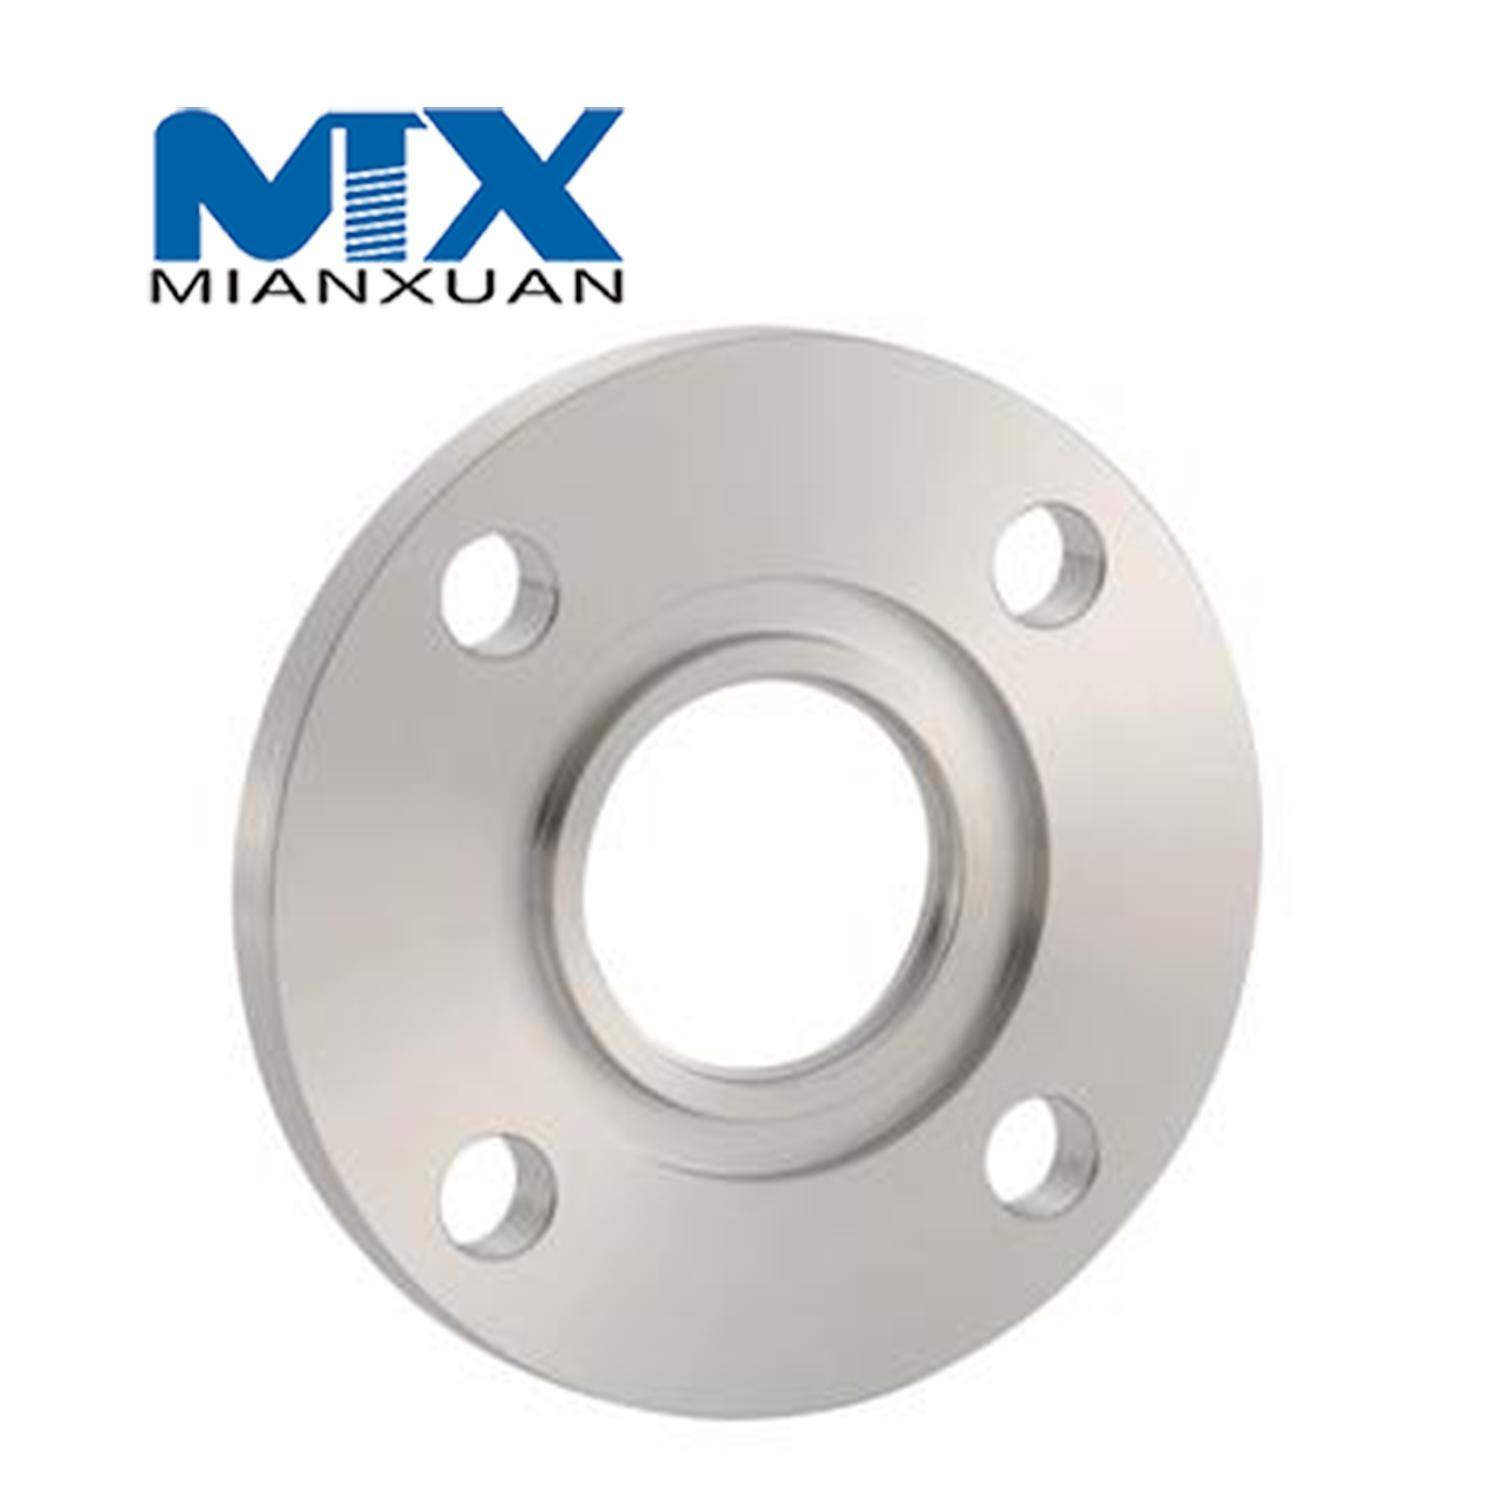 CNC Metal Stainless Steel Aluminum Precision Reducing Flange